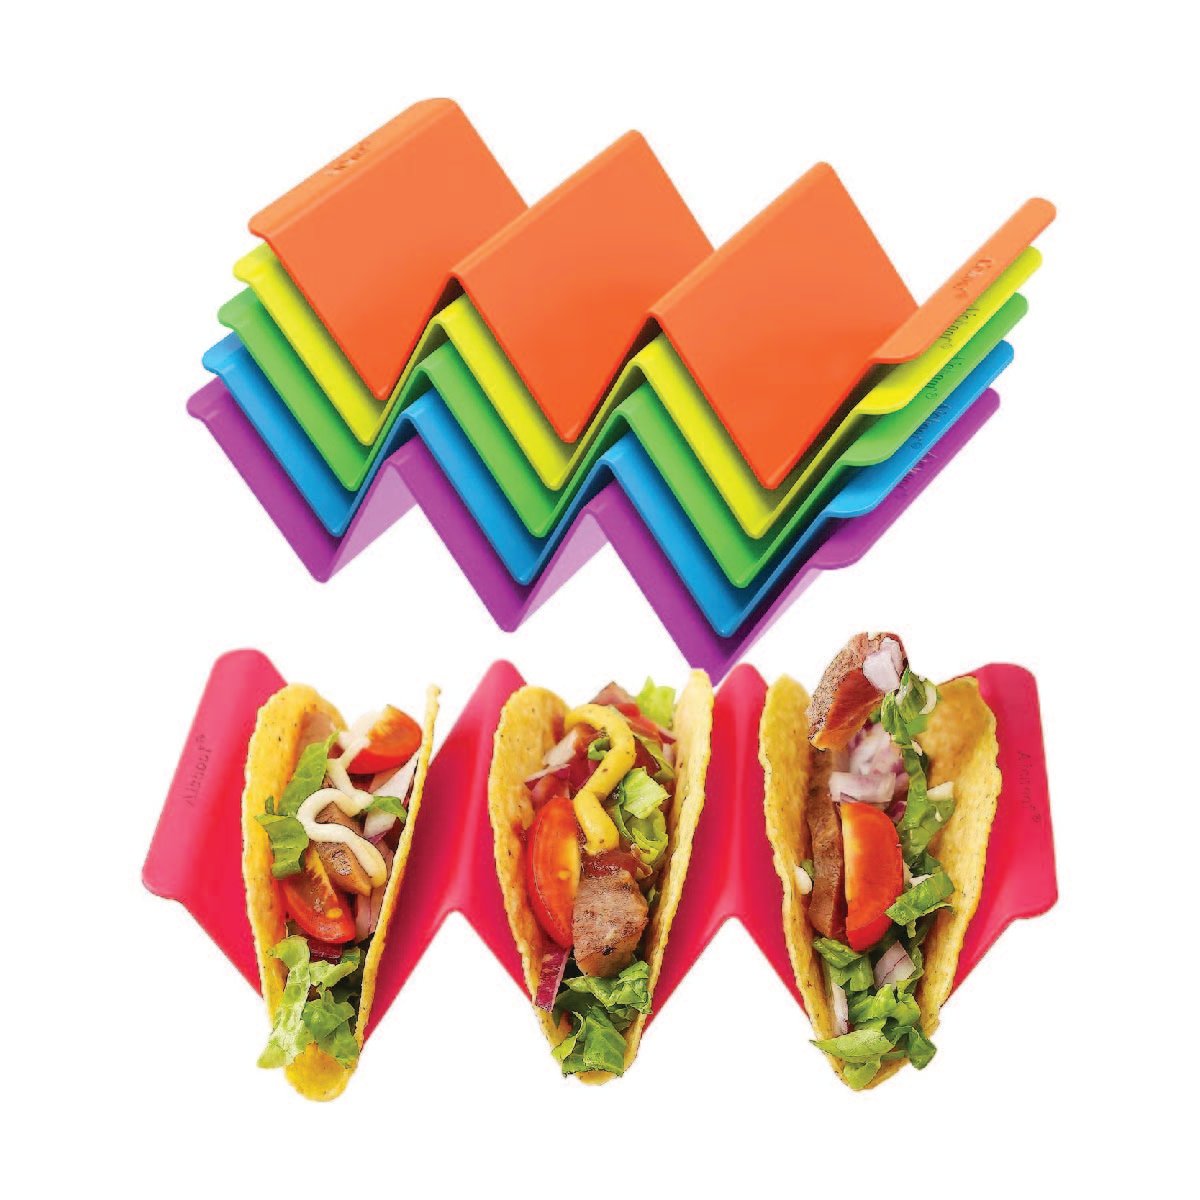 Bright and different-colored zigzag-shaped plastic taco holders each of which can hold three tacos.